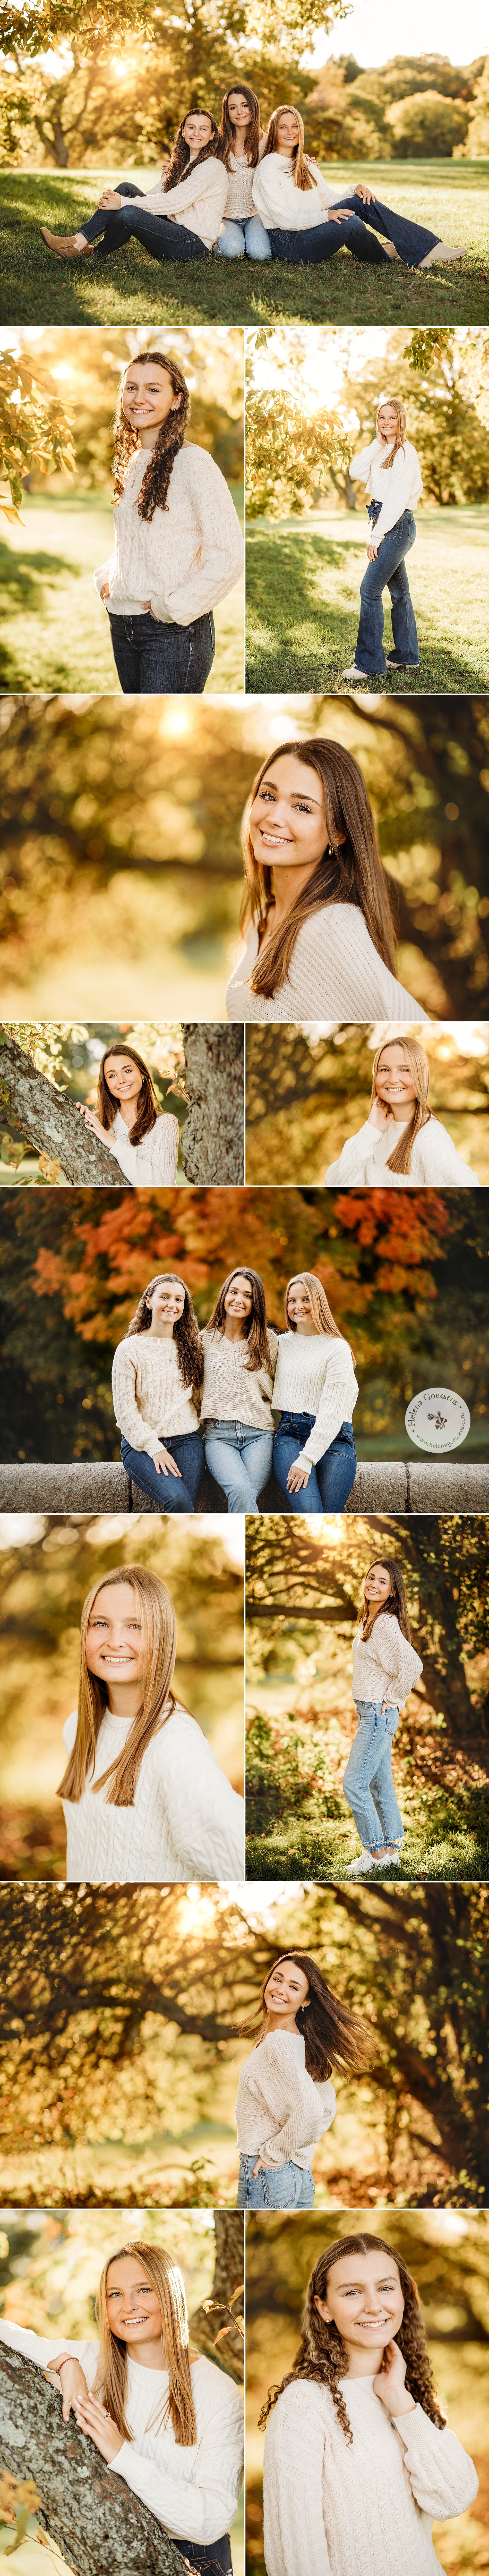 Larz Anderson Park senior session for four young women in white and cream sweaters in Brookline MA photographed by Boston senior portrait photographer Helena Goessens Photography